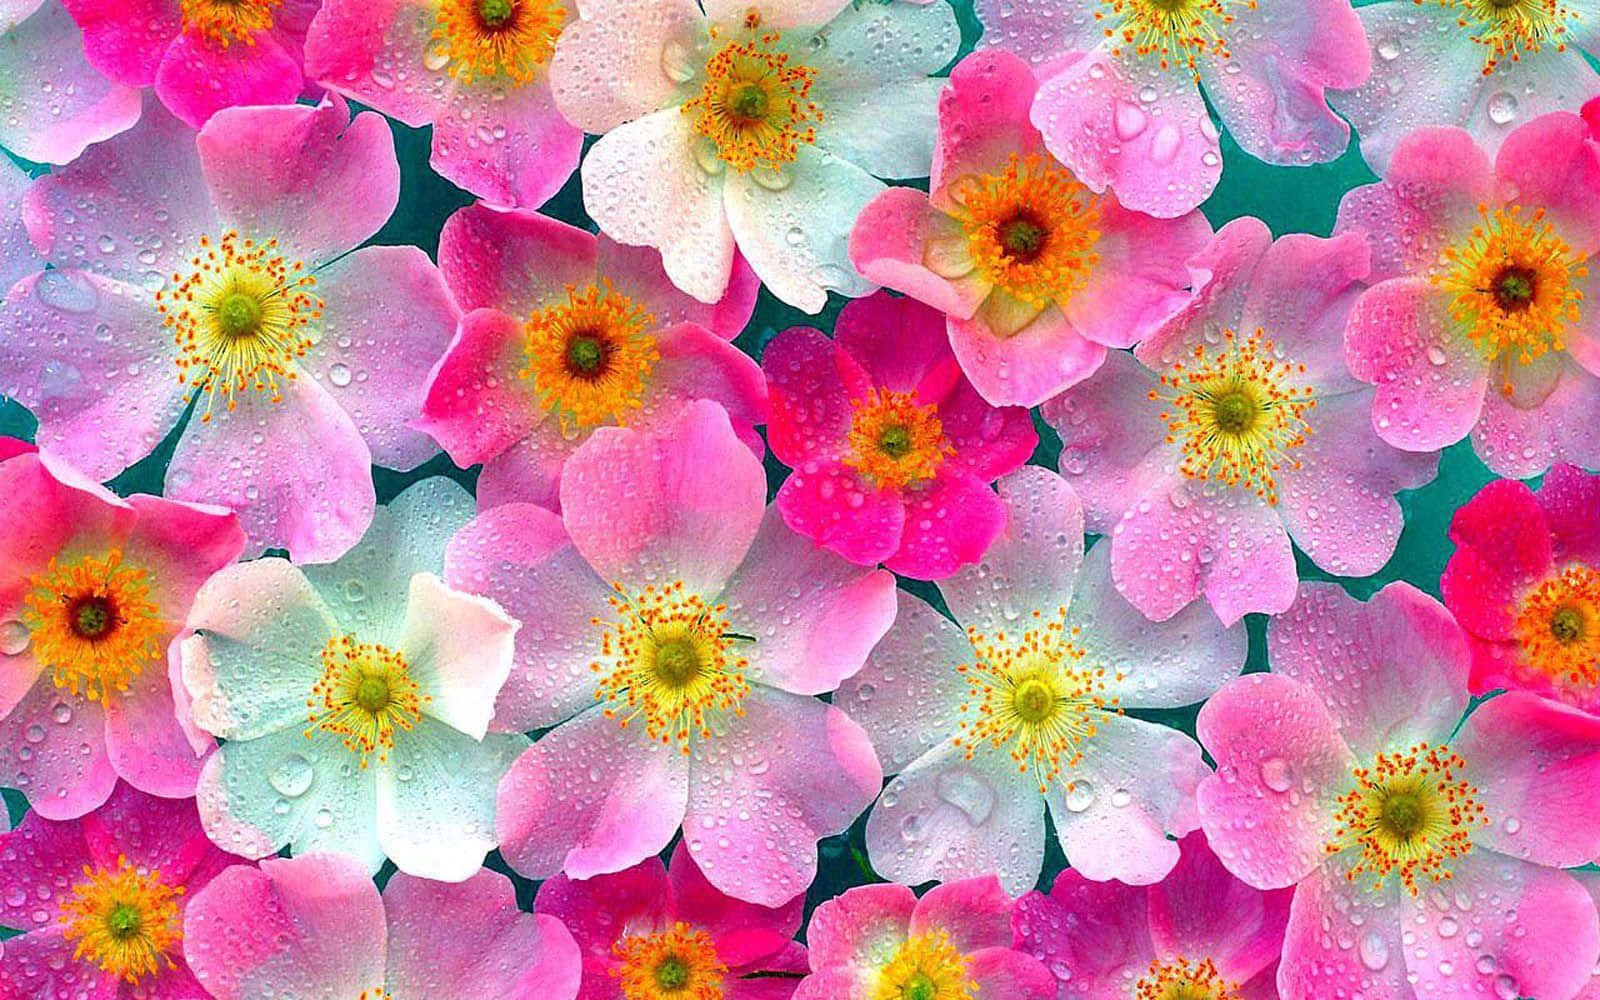 Brighten up your day with this beautiful floral laptop pattern Wallpaper